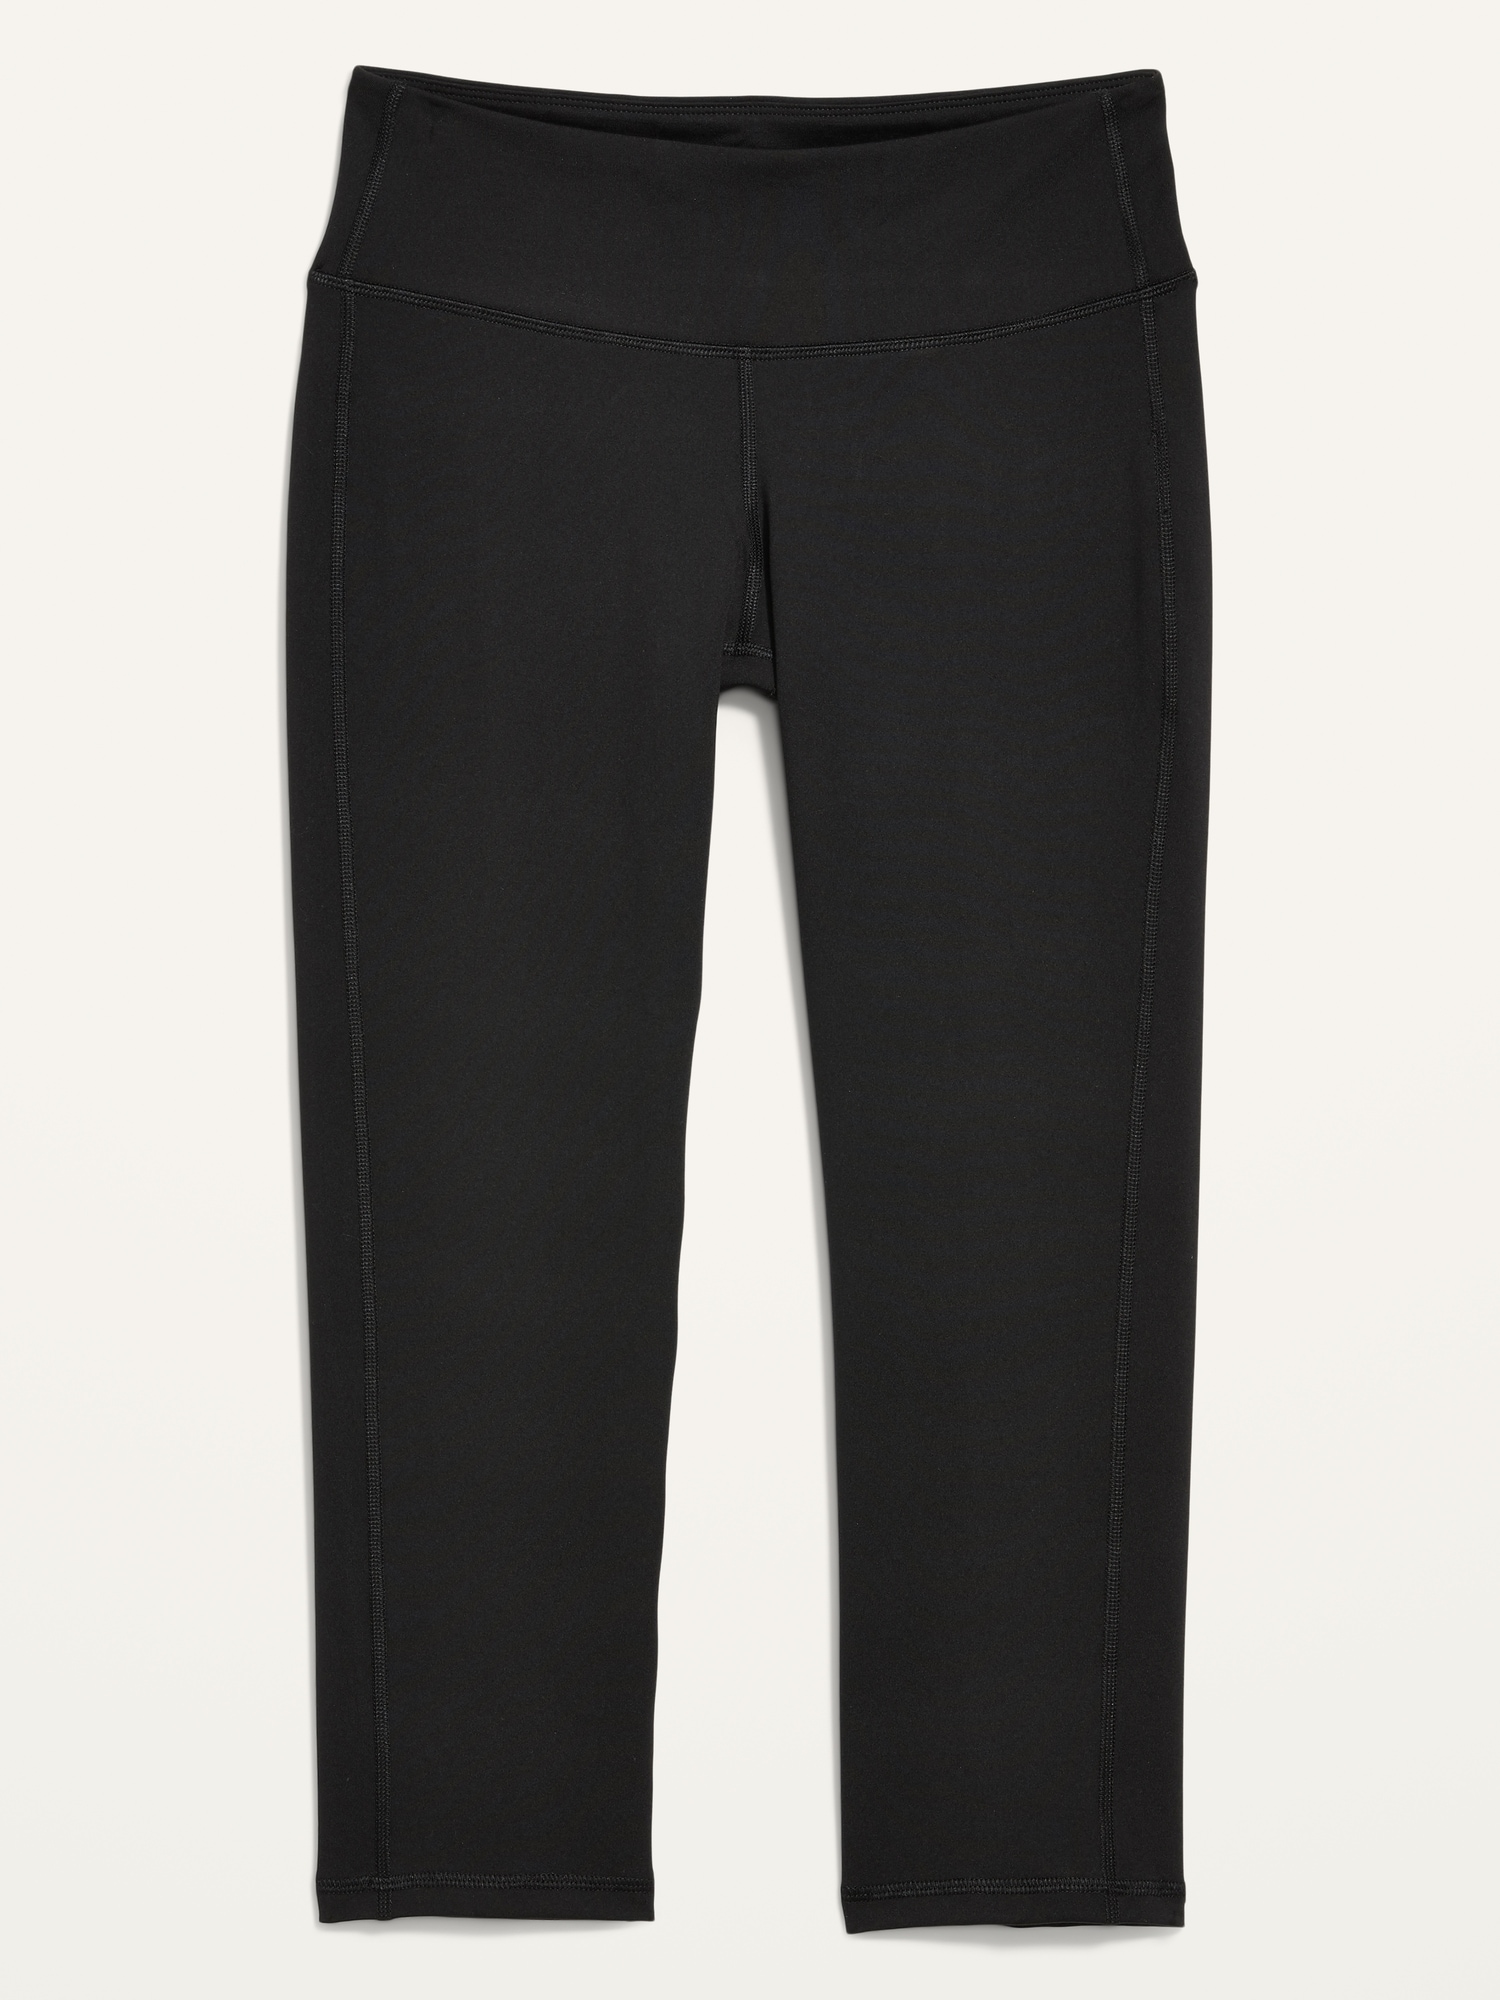 Old Navy, Pants & Jumpsuits, Old Navy Midrise Elevate Sidepocket Meshtrim  78length Leggings For Women